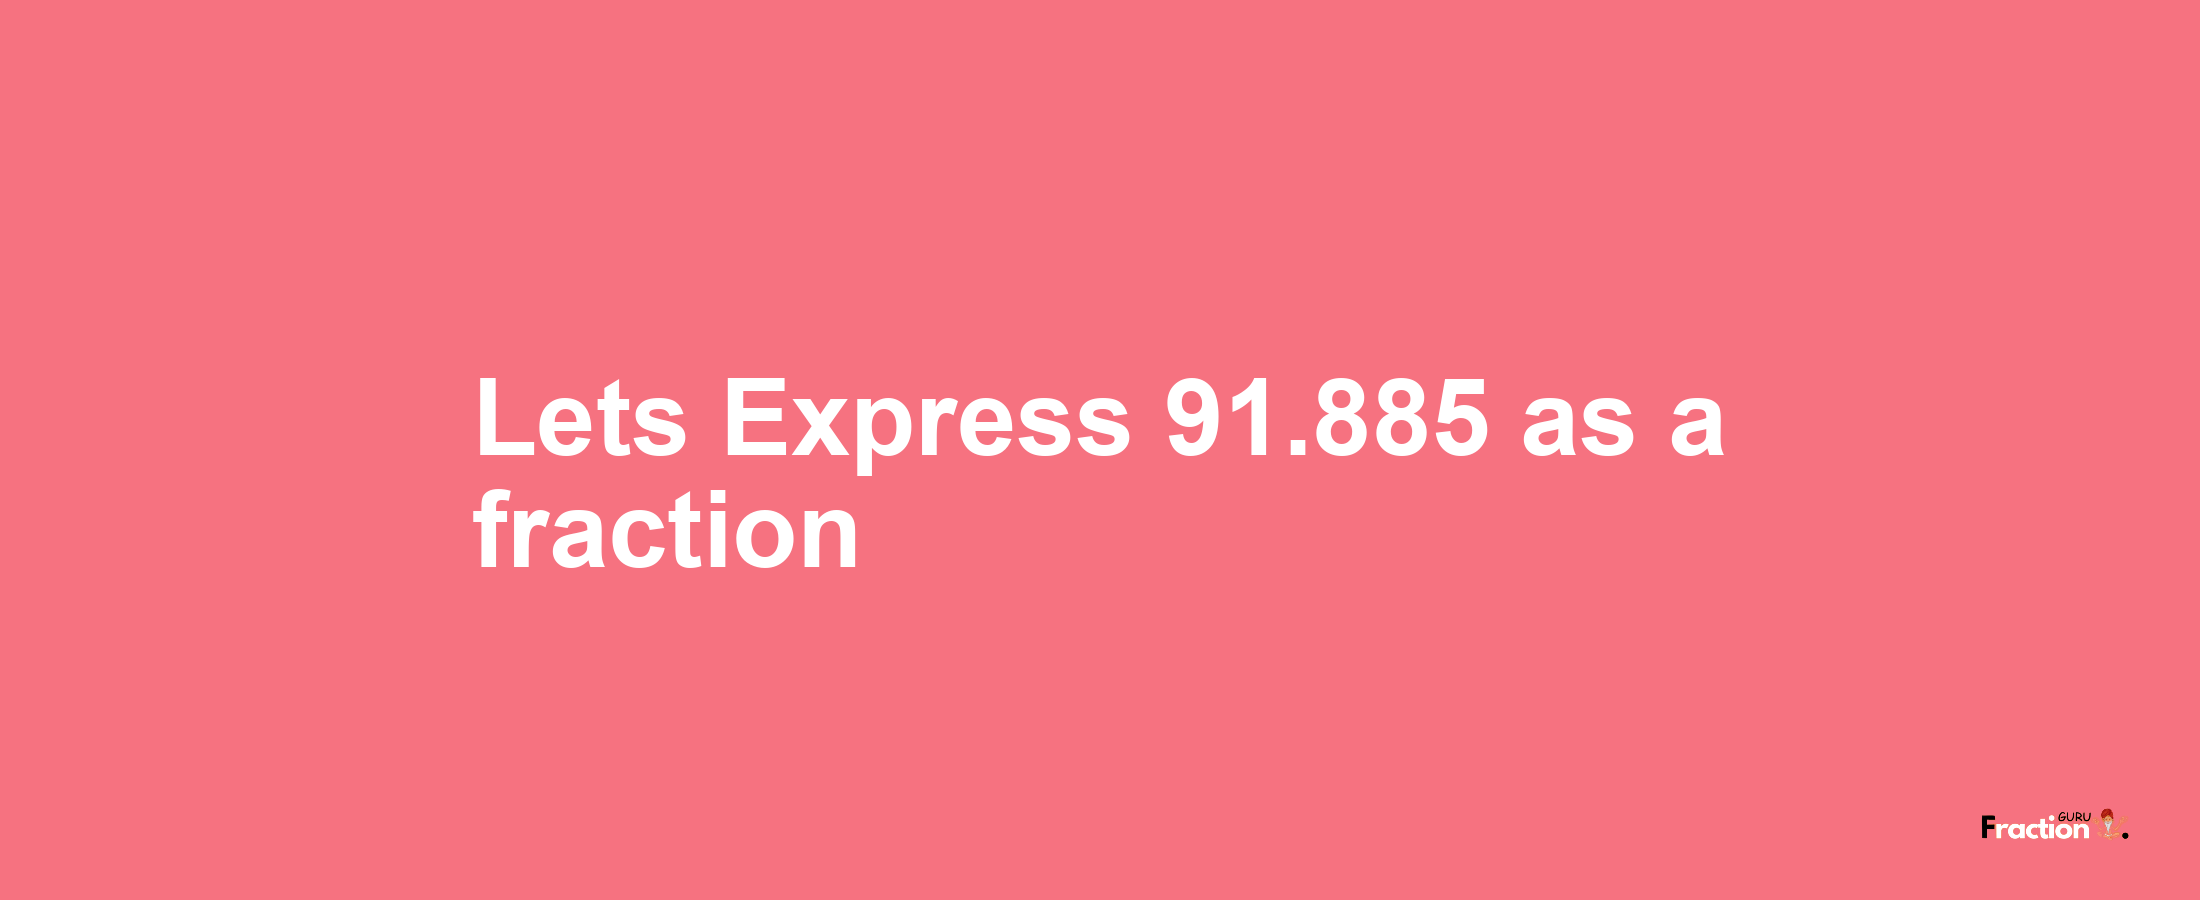 Lets Express 91.885 as afraction